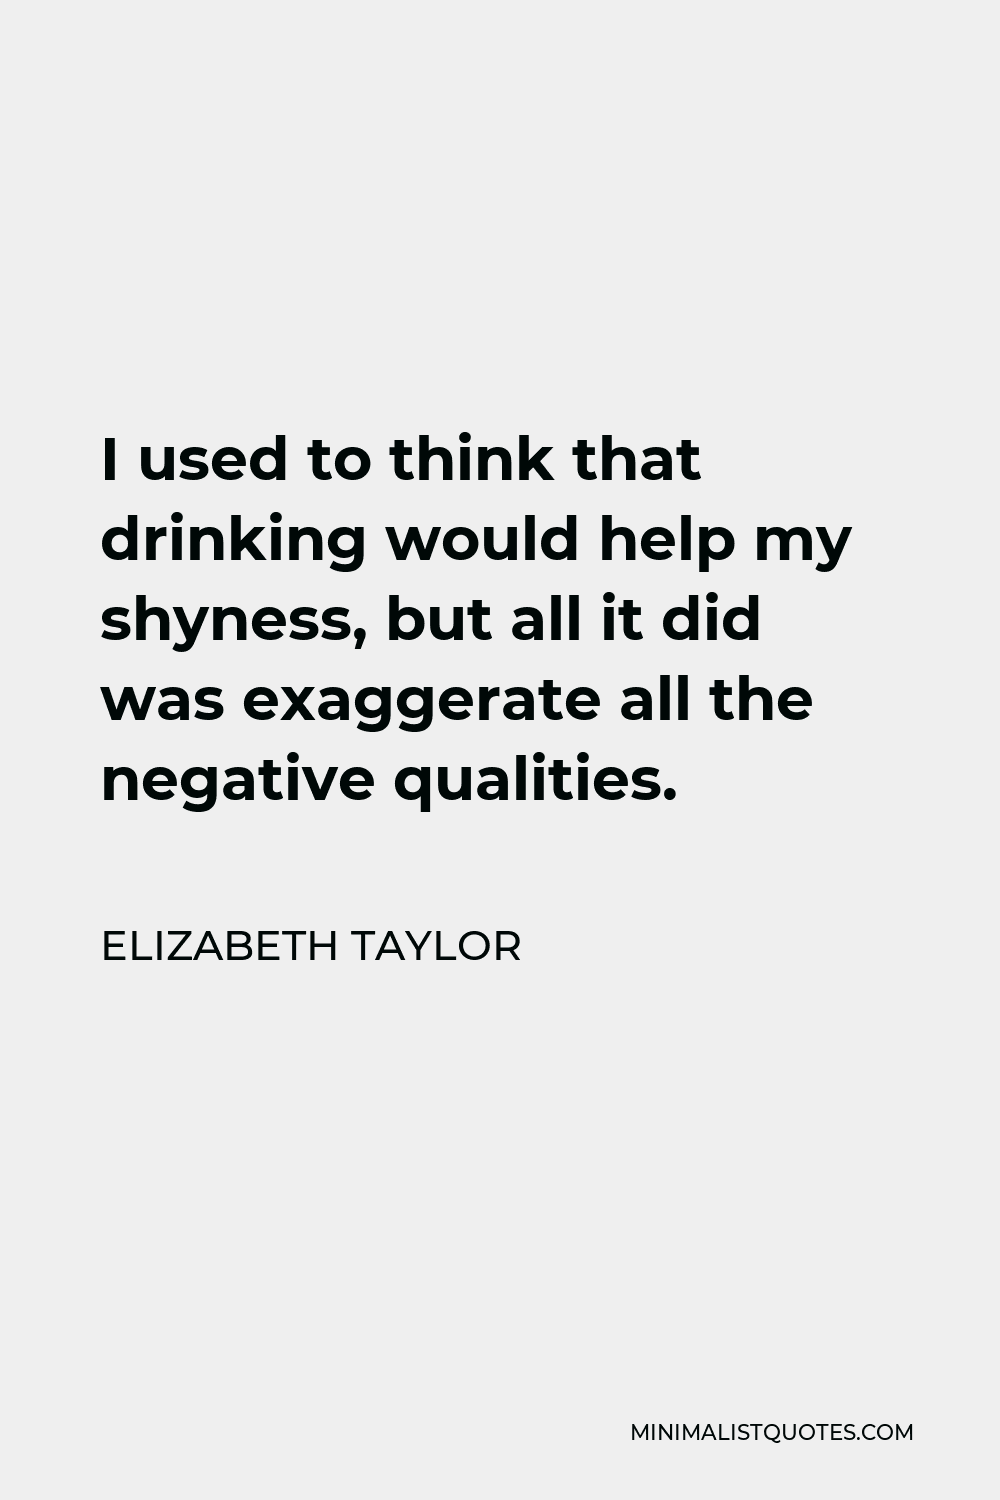 Elizabeth Taylor Quote - I used to think that drinking would help my shyness, but all it did was exaggerate all the negative qualities.